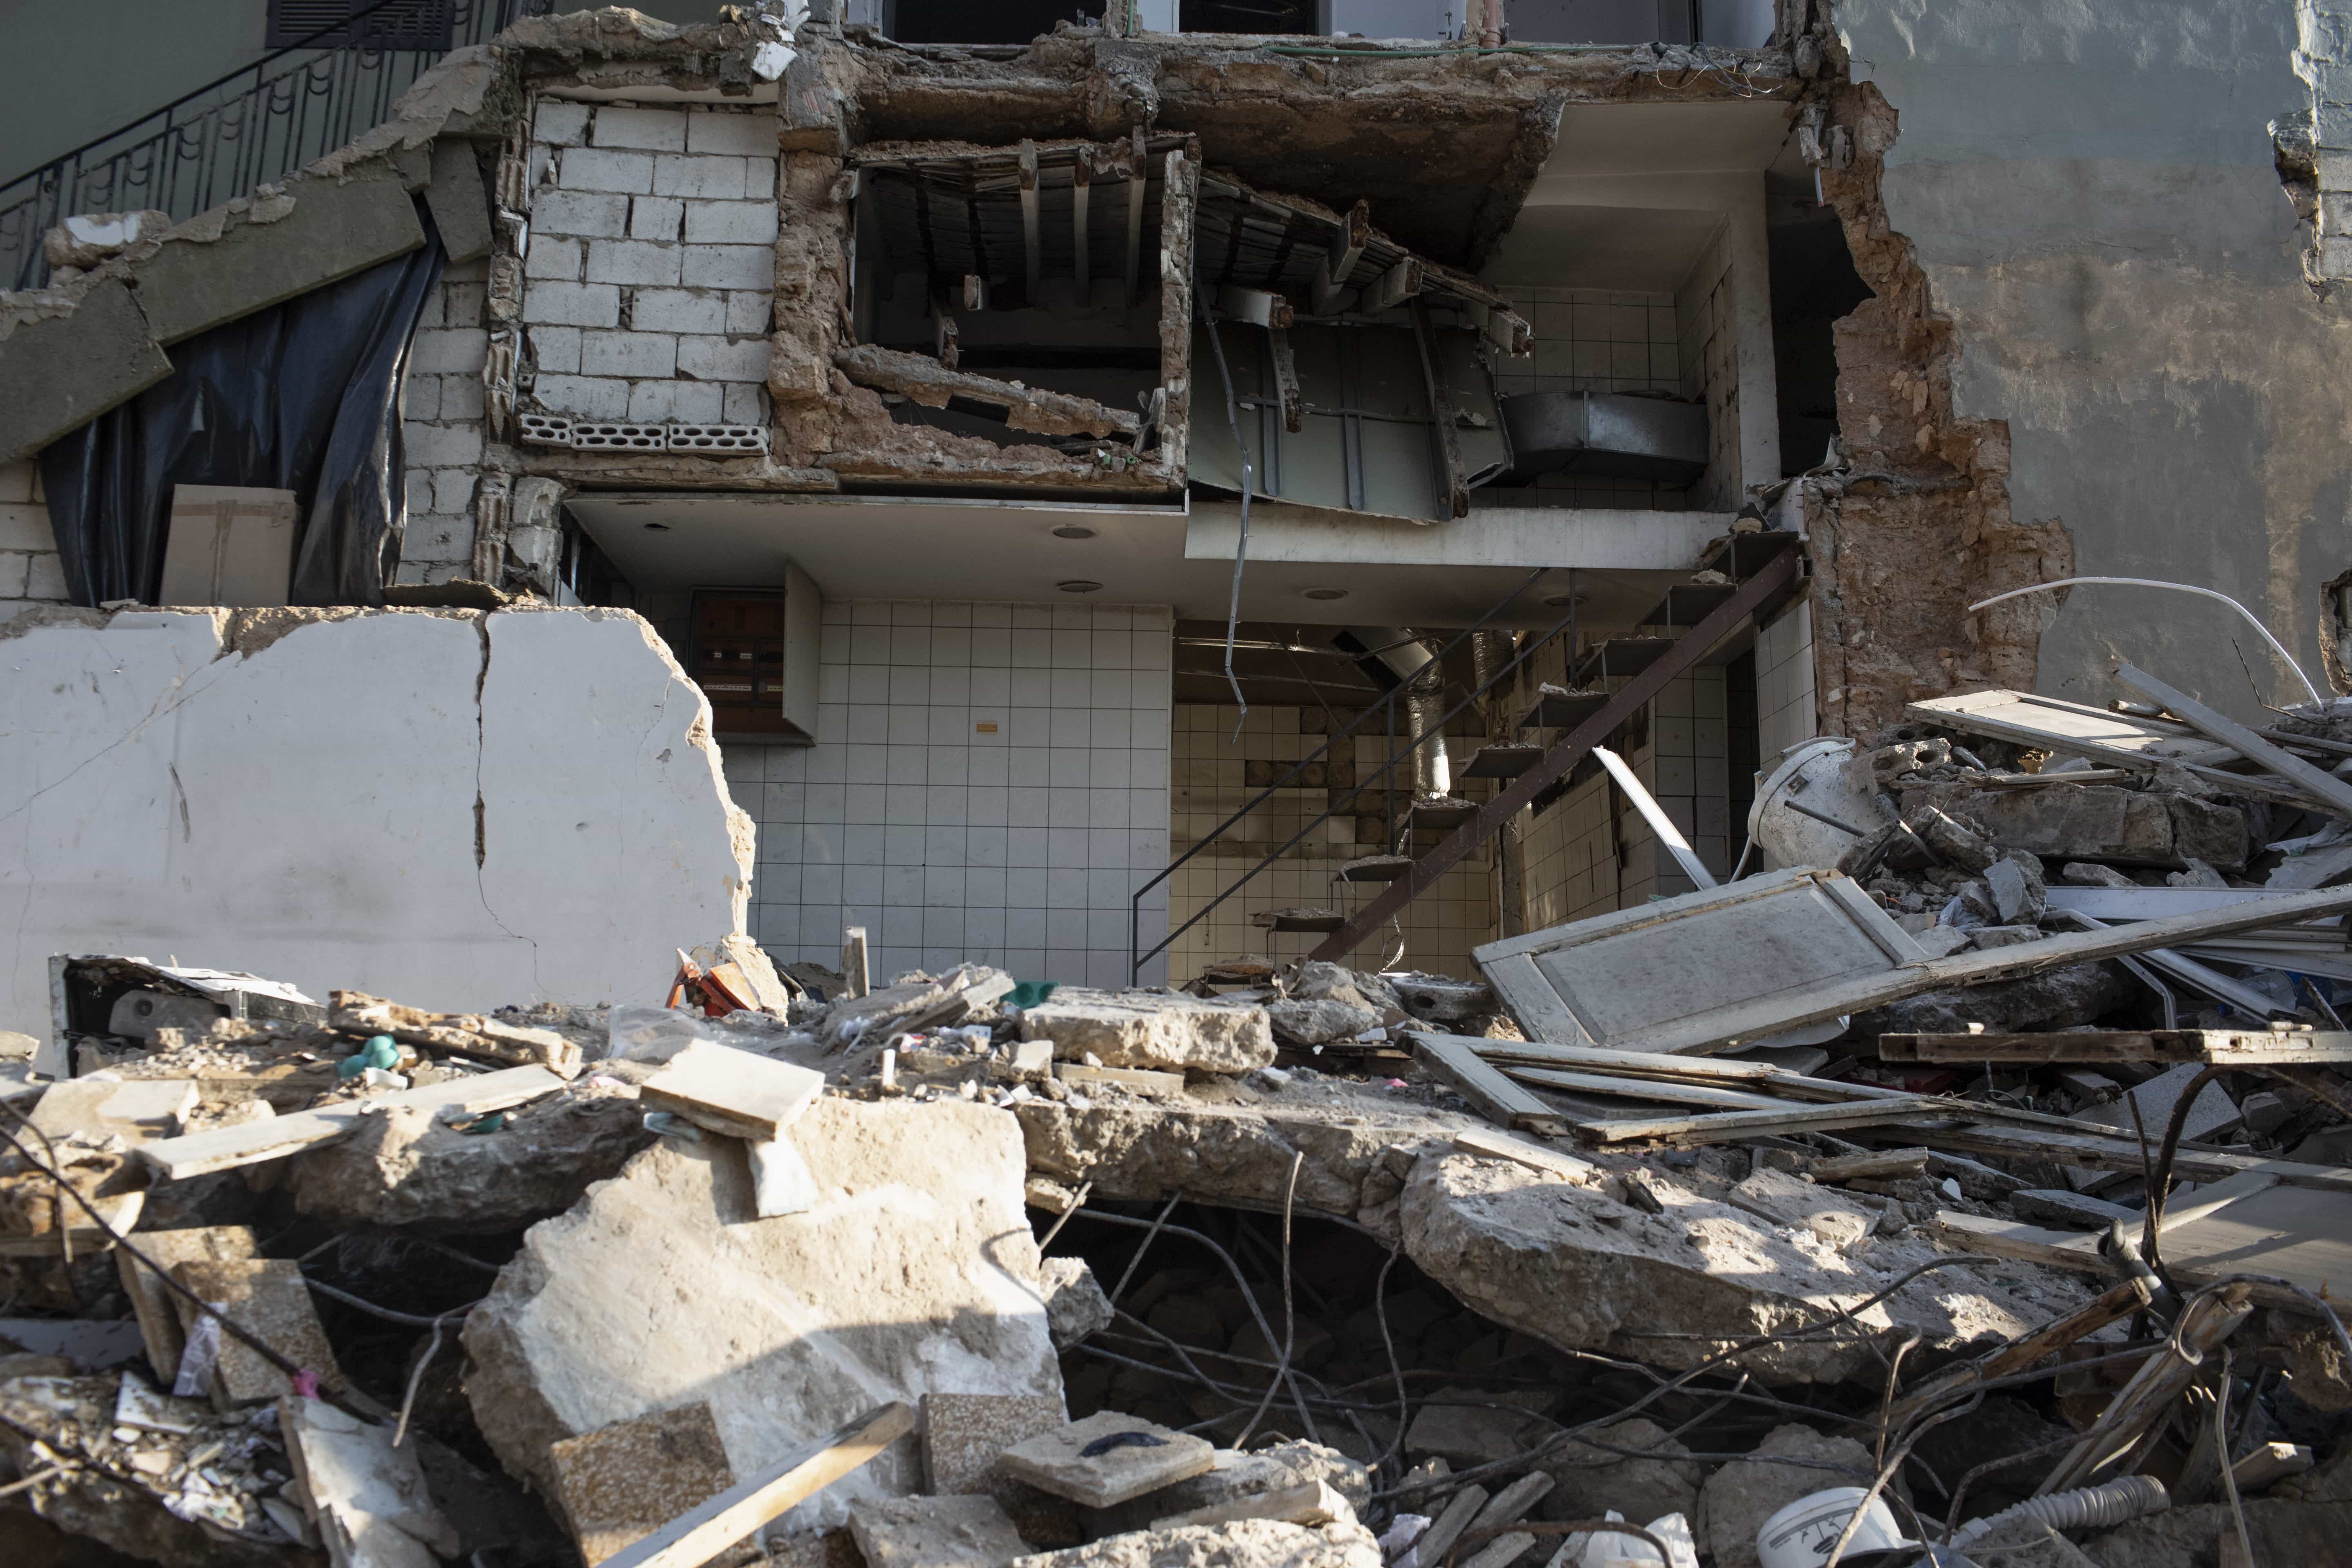 Debris from damaged buildings and roads can be seen over 1,000 feet south of the blast site, a sign of the explosion's force. Many injured people whose homes have been damaged or completely destroyed have been forced to sleep on the street and wait for medical treatment.